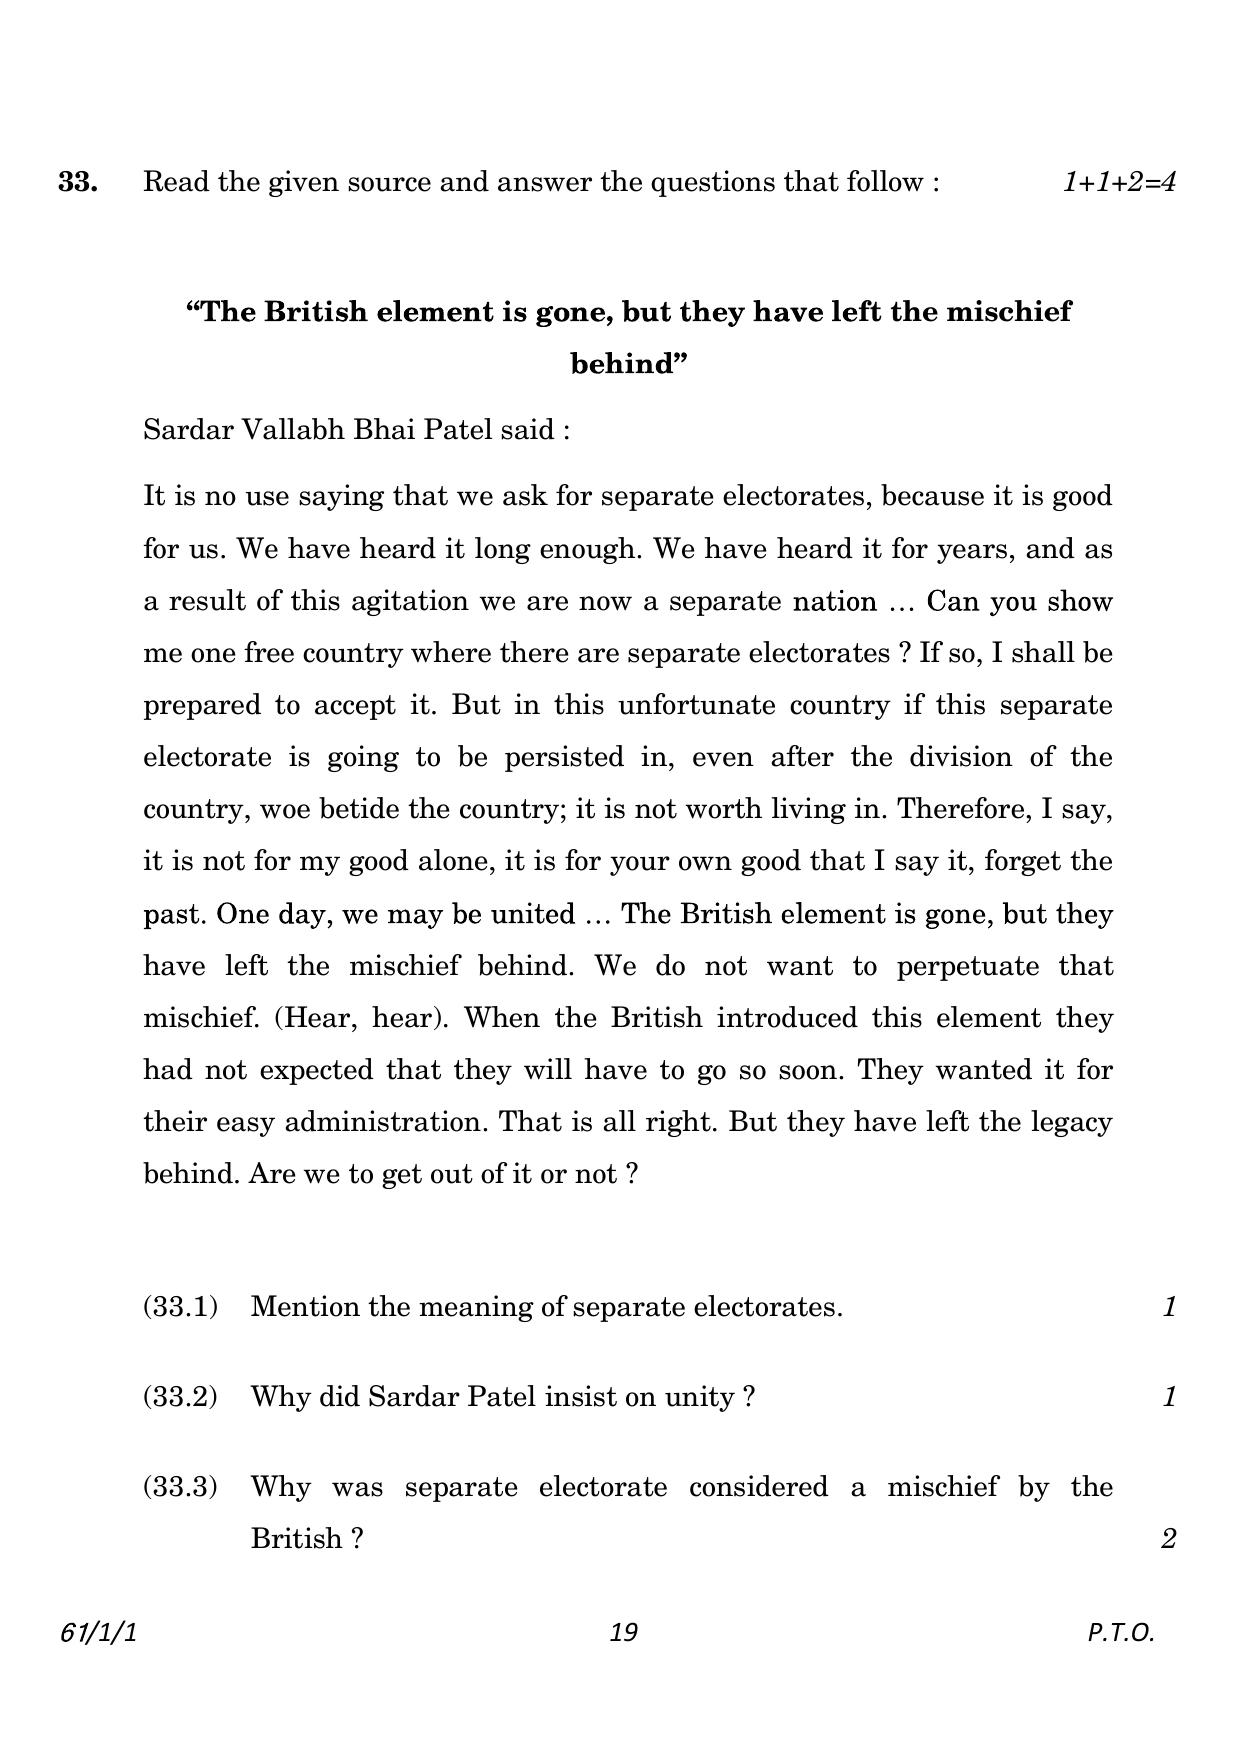 CBSE Class 12 61-1-1 History 2023 Question Paper - Page 19